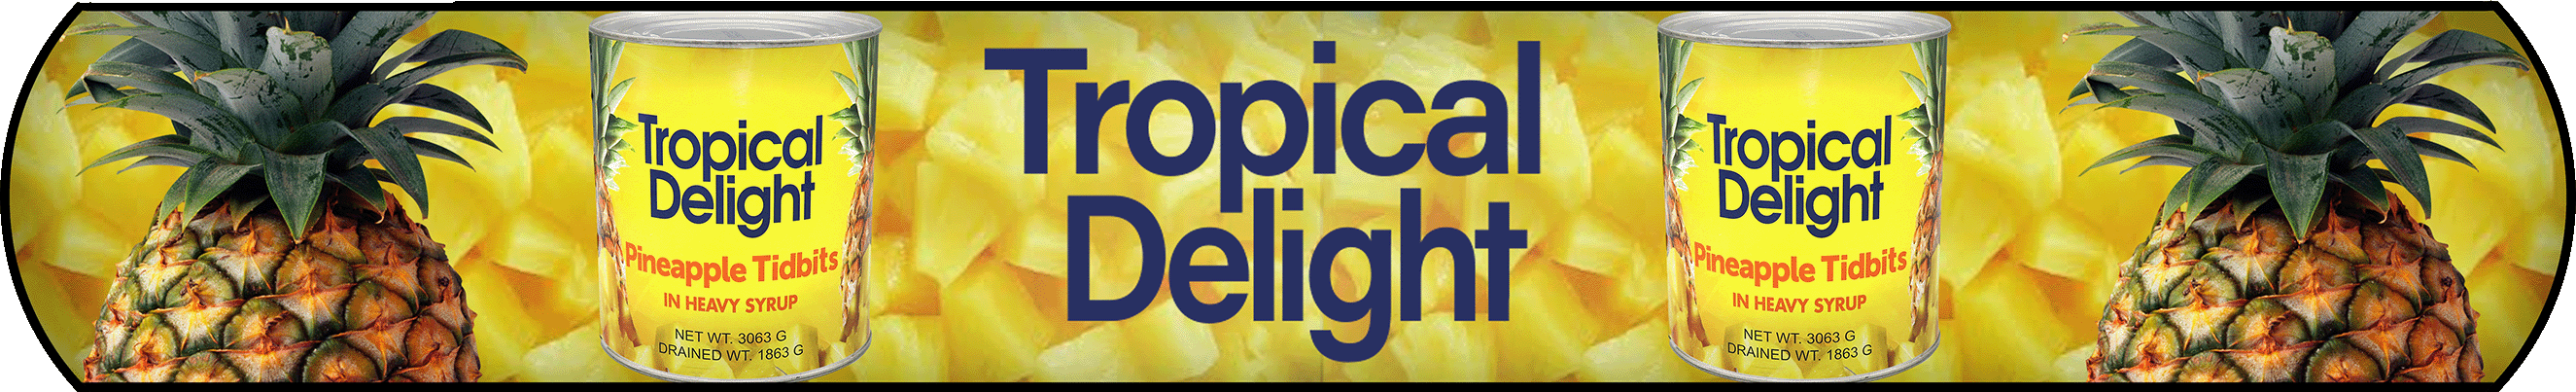 Tropical Delight Banner